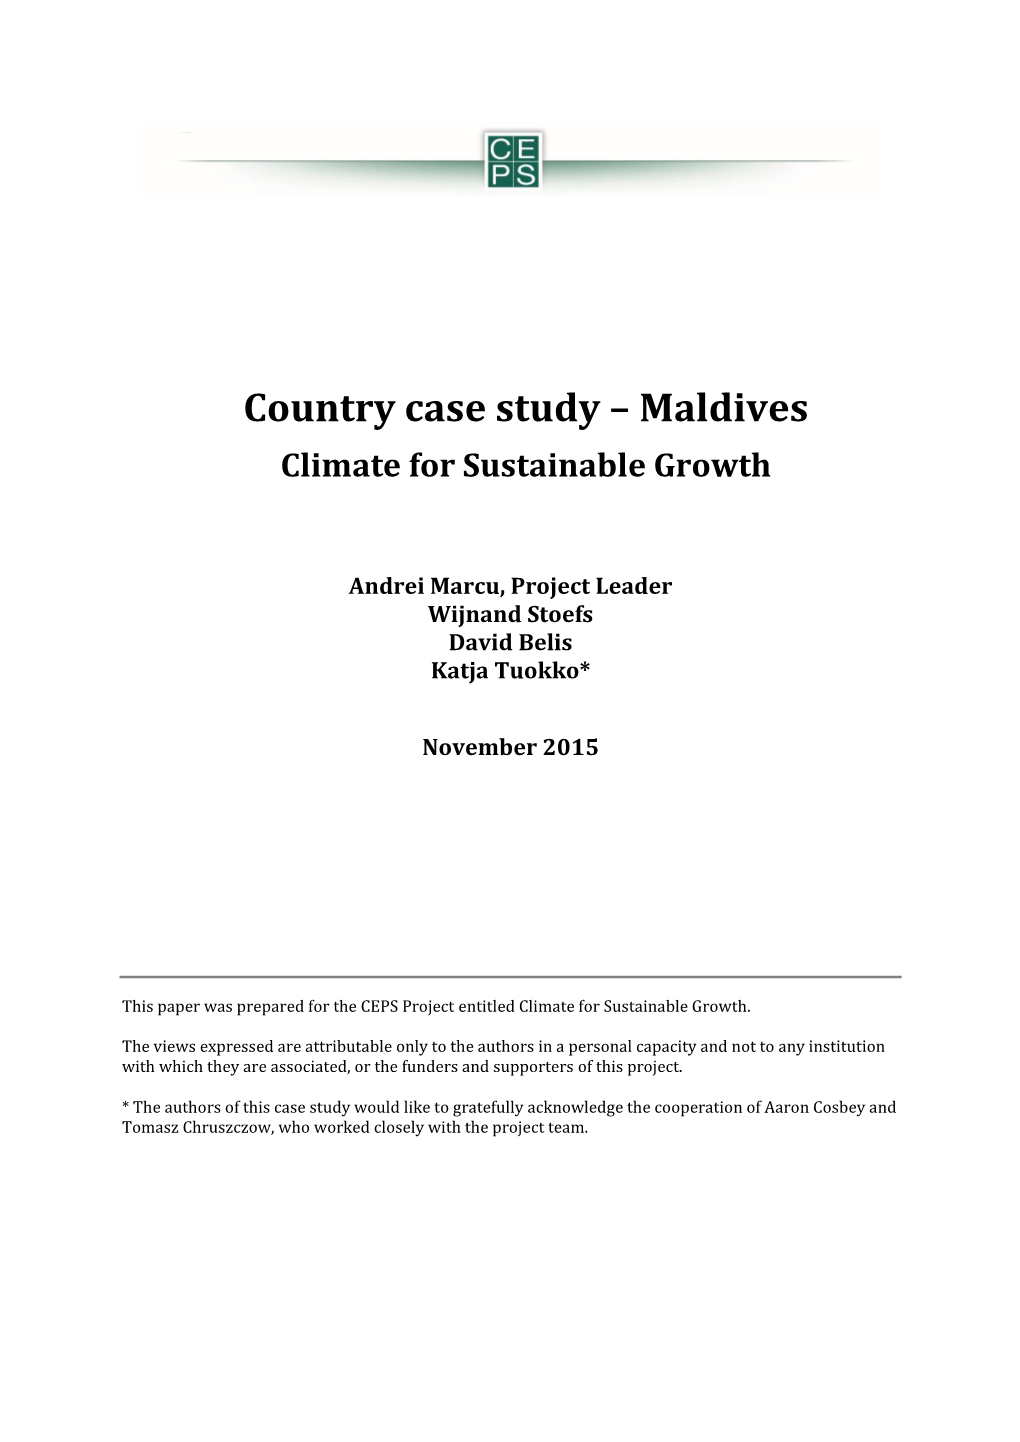 Country Case Study – Maldives Climate for Sustainable Growth